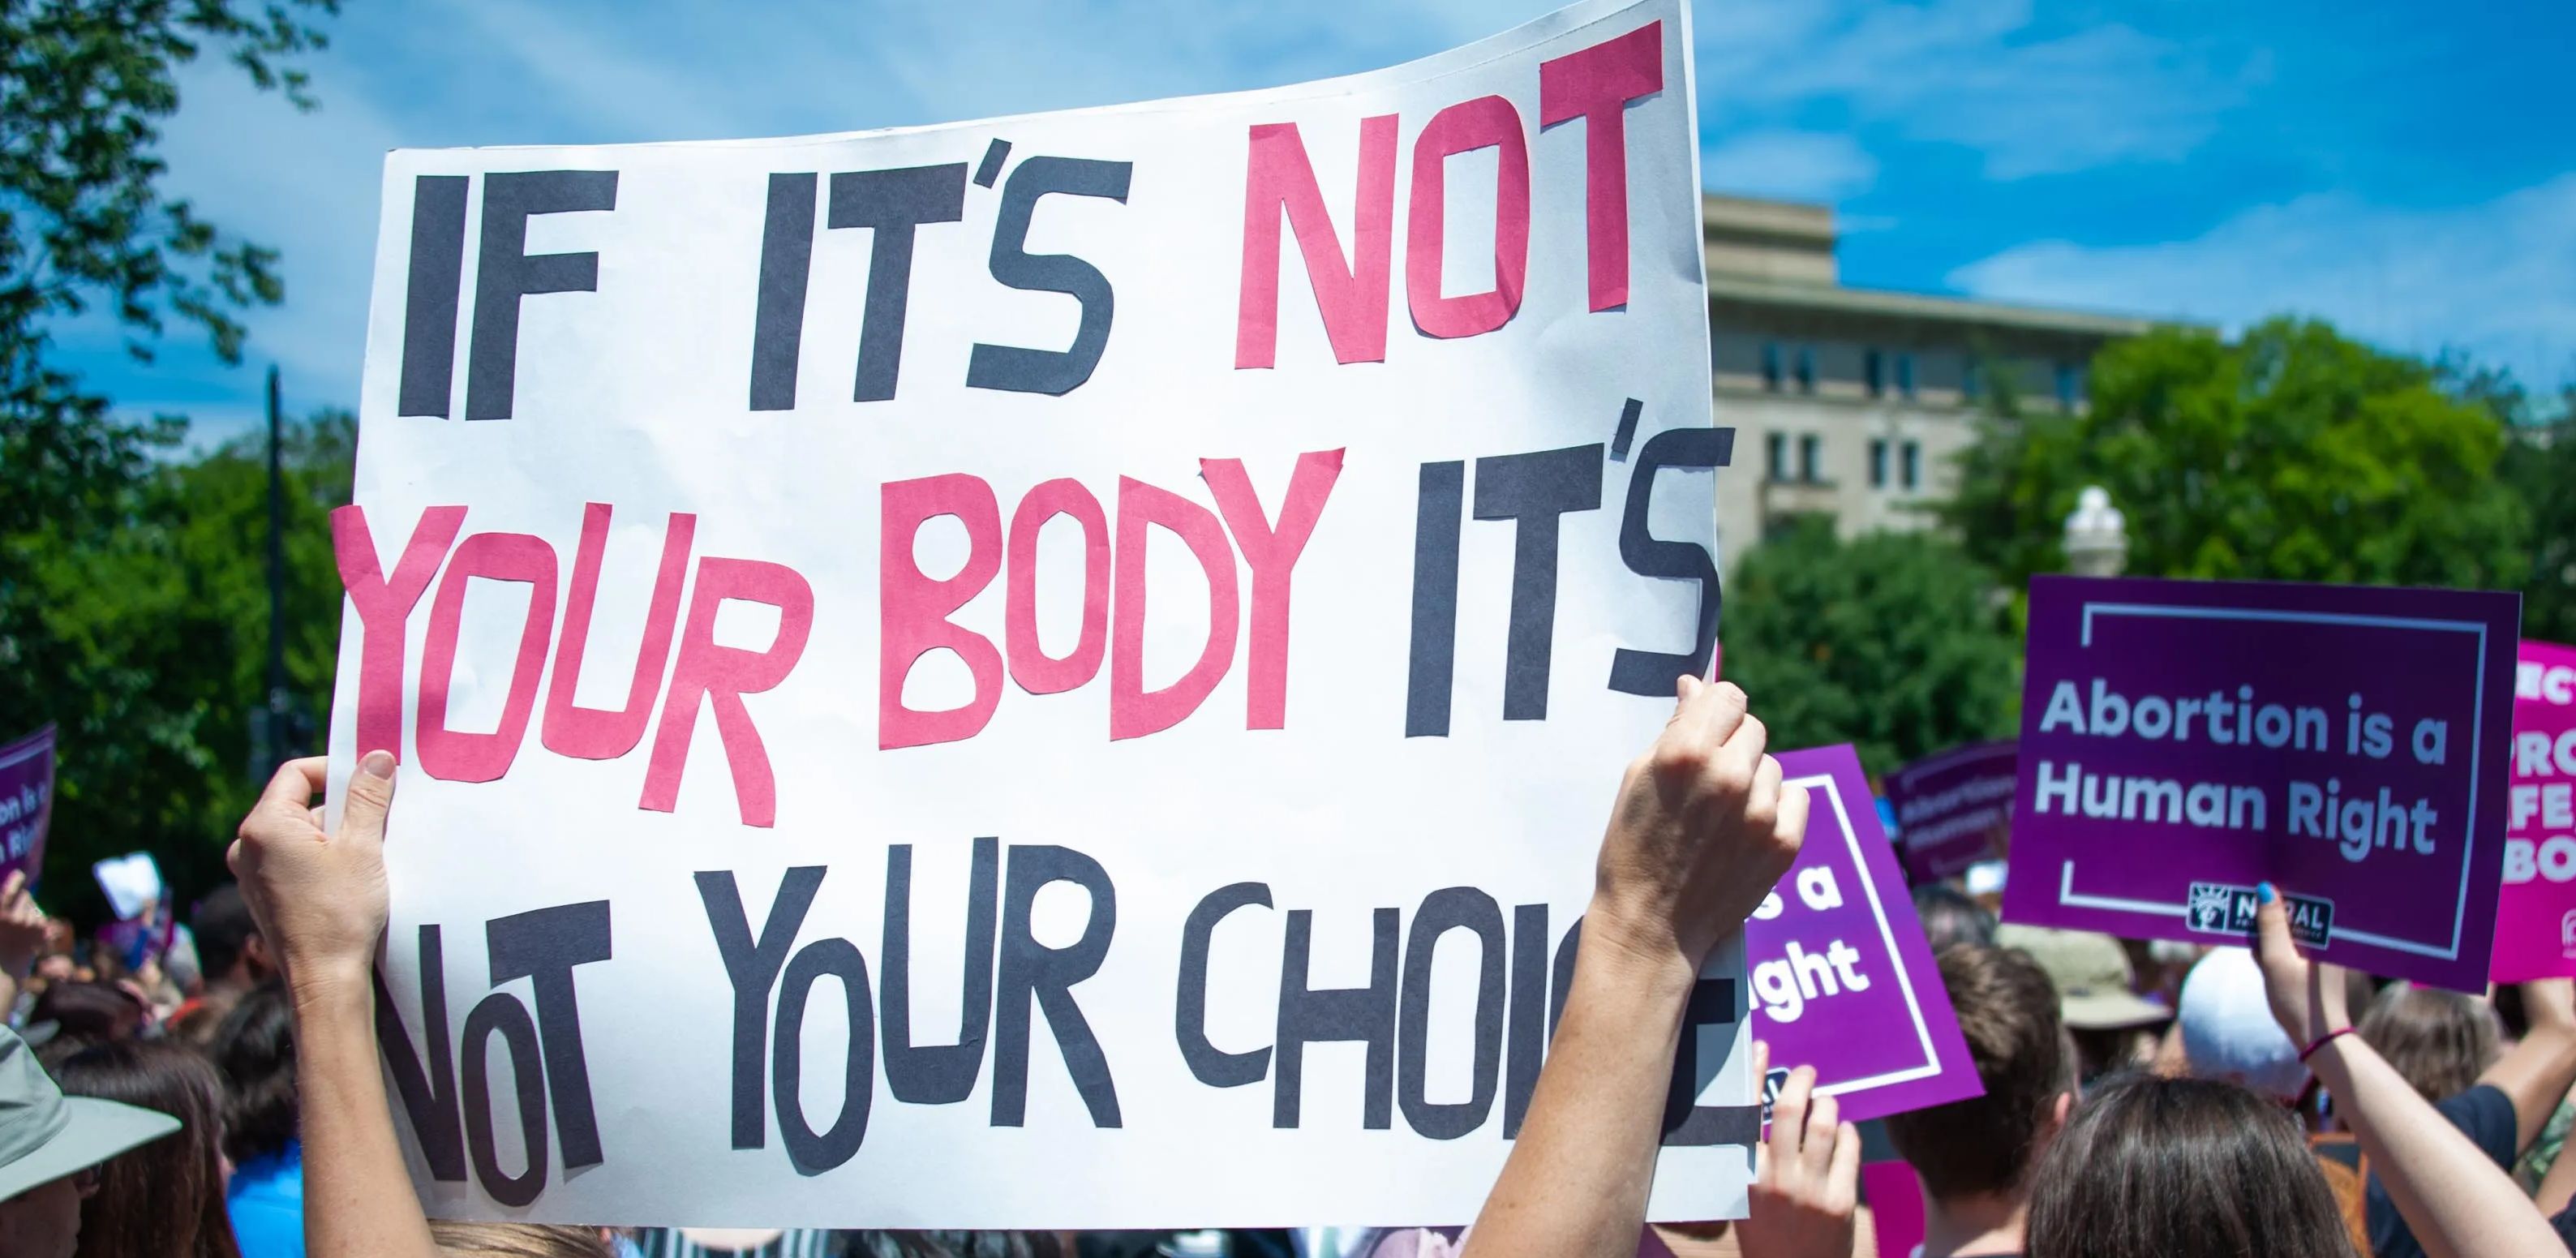 Pro-choice protesters hold up banners.